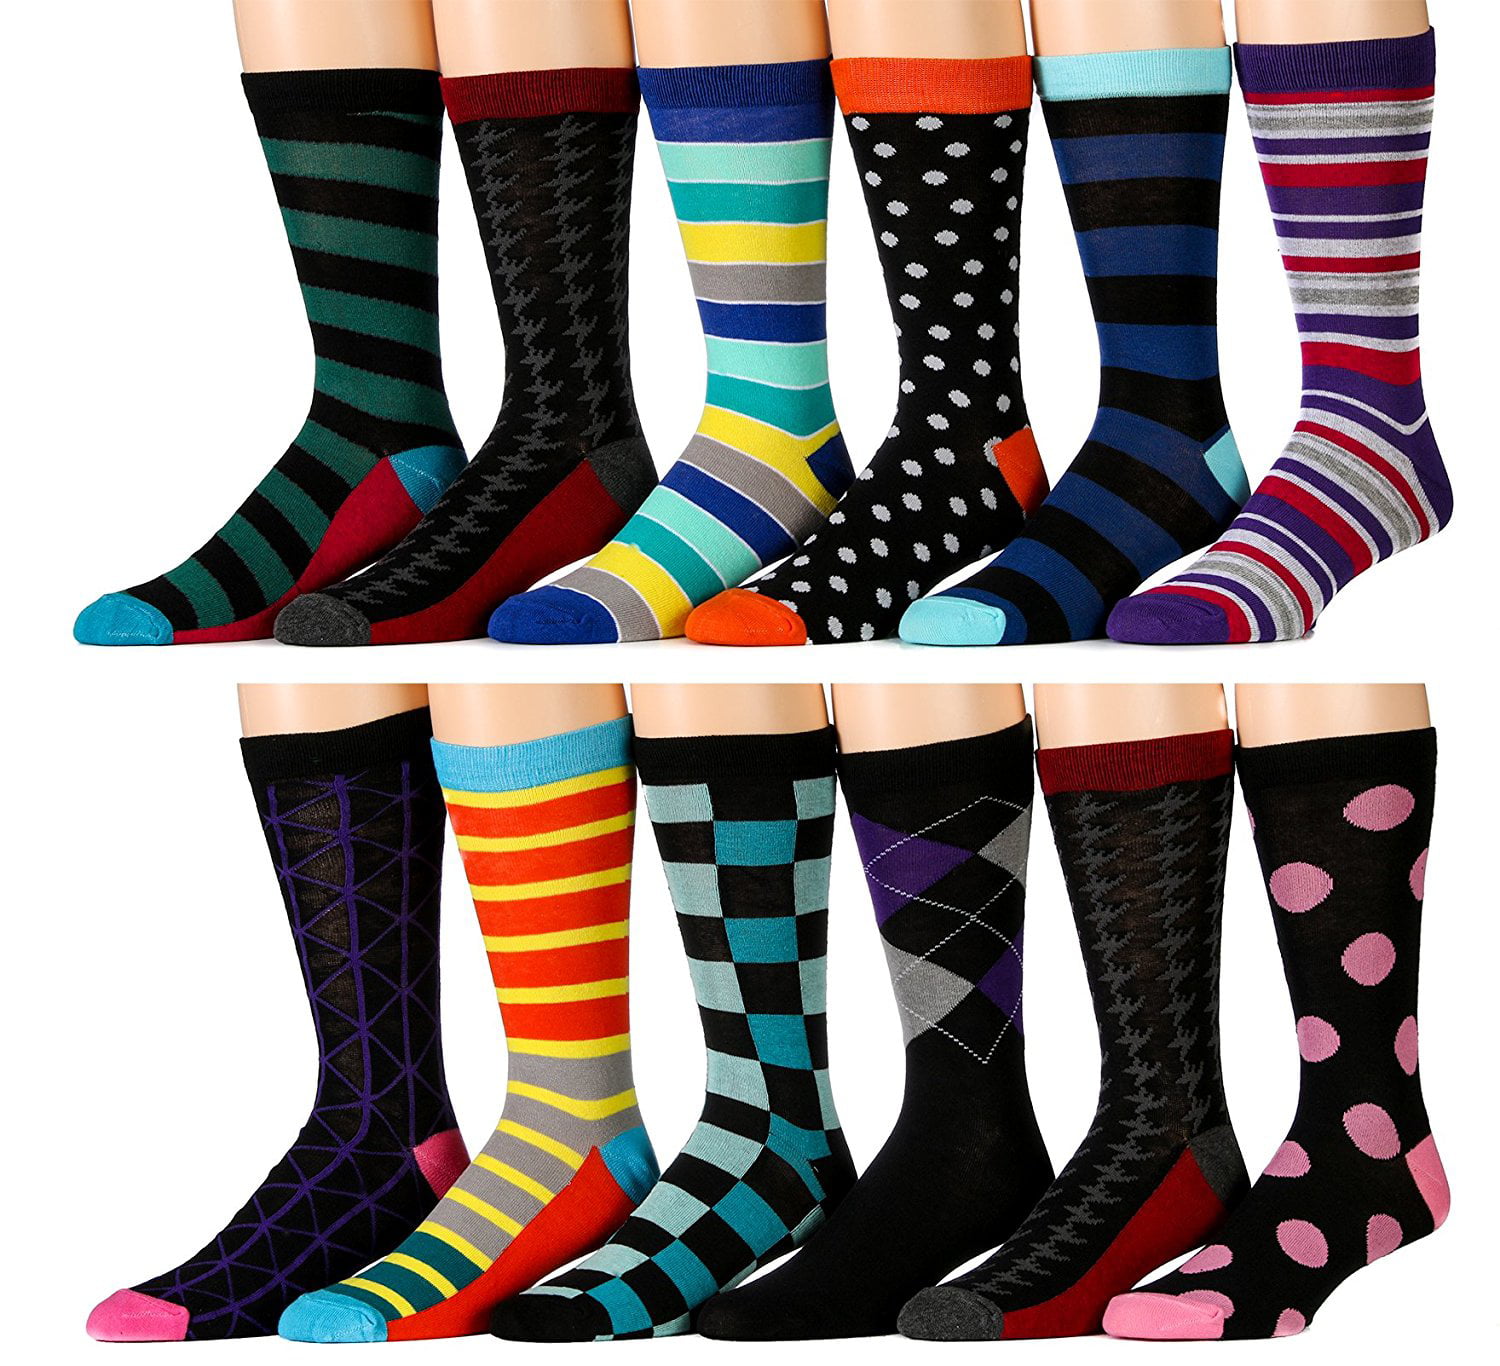 12 Pairs of Excell Mens Designer Cotton Colorful Dress Socks (12 Pairs ...